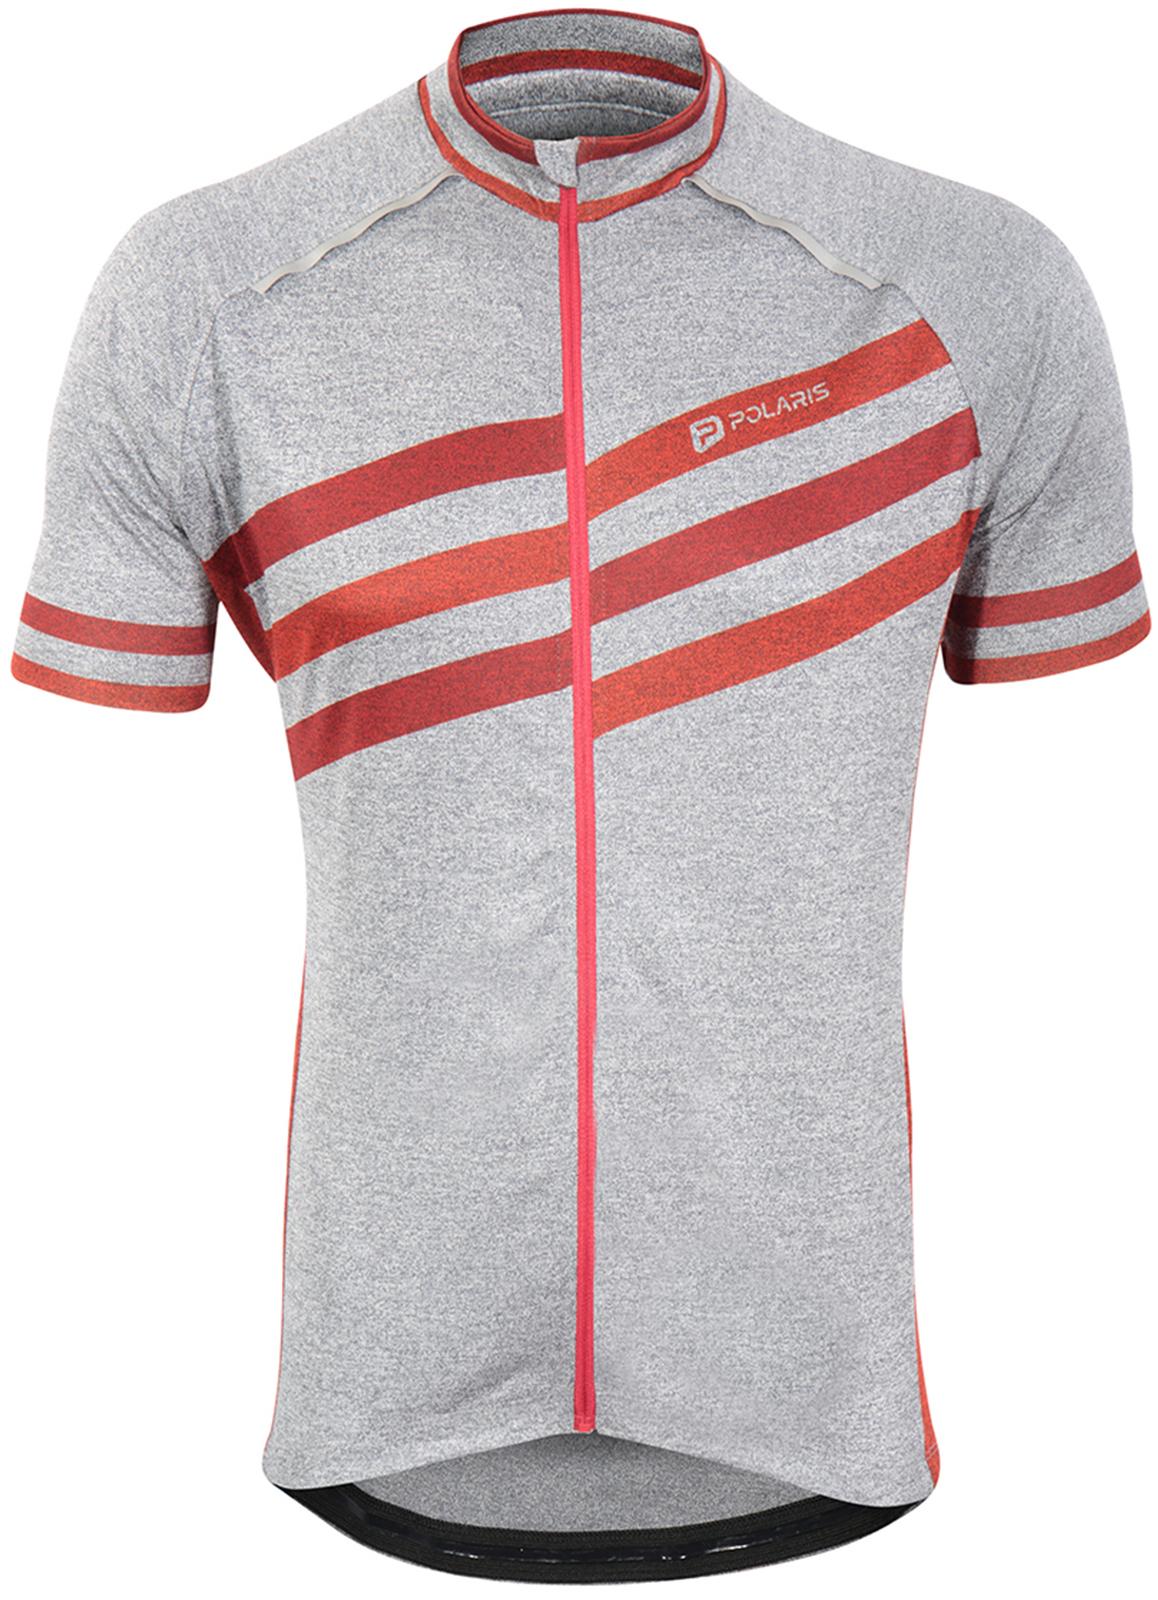 halfords cycling jersey